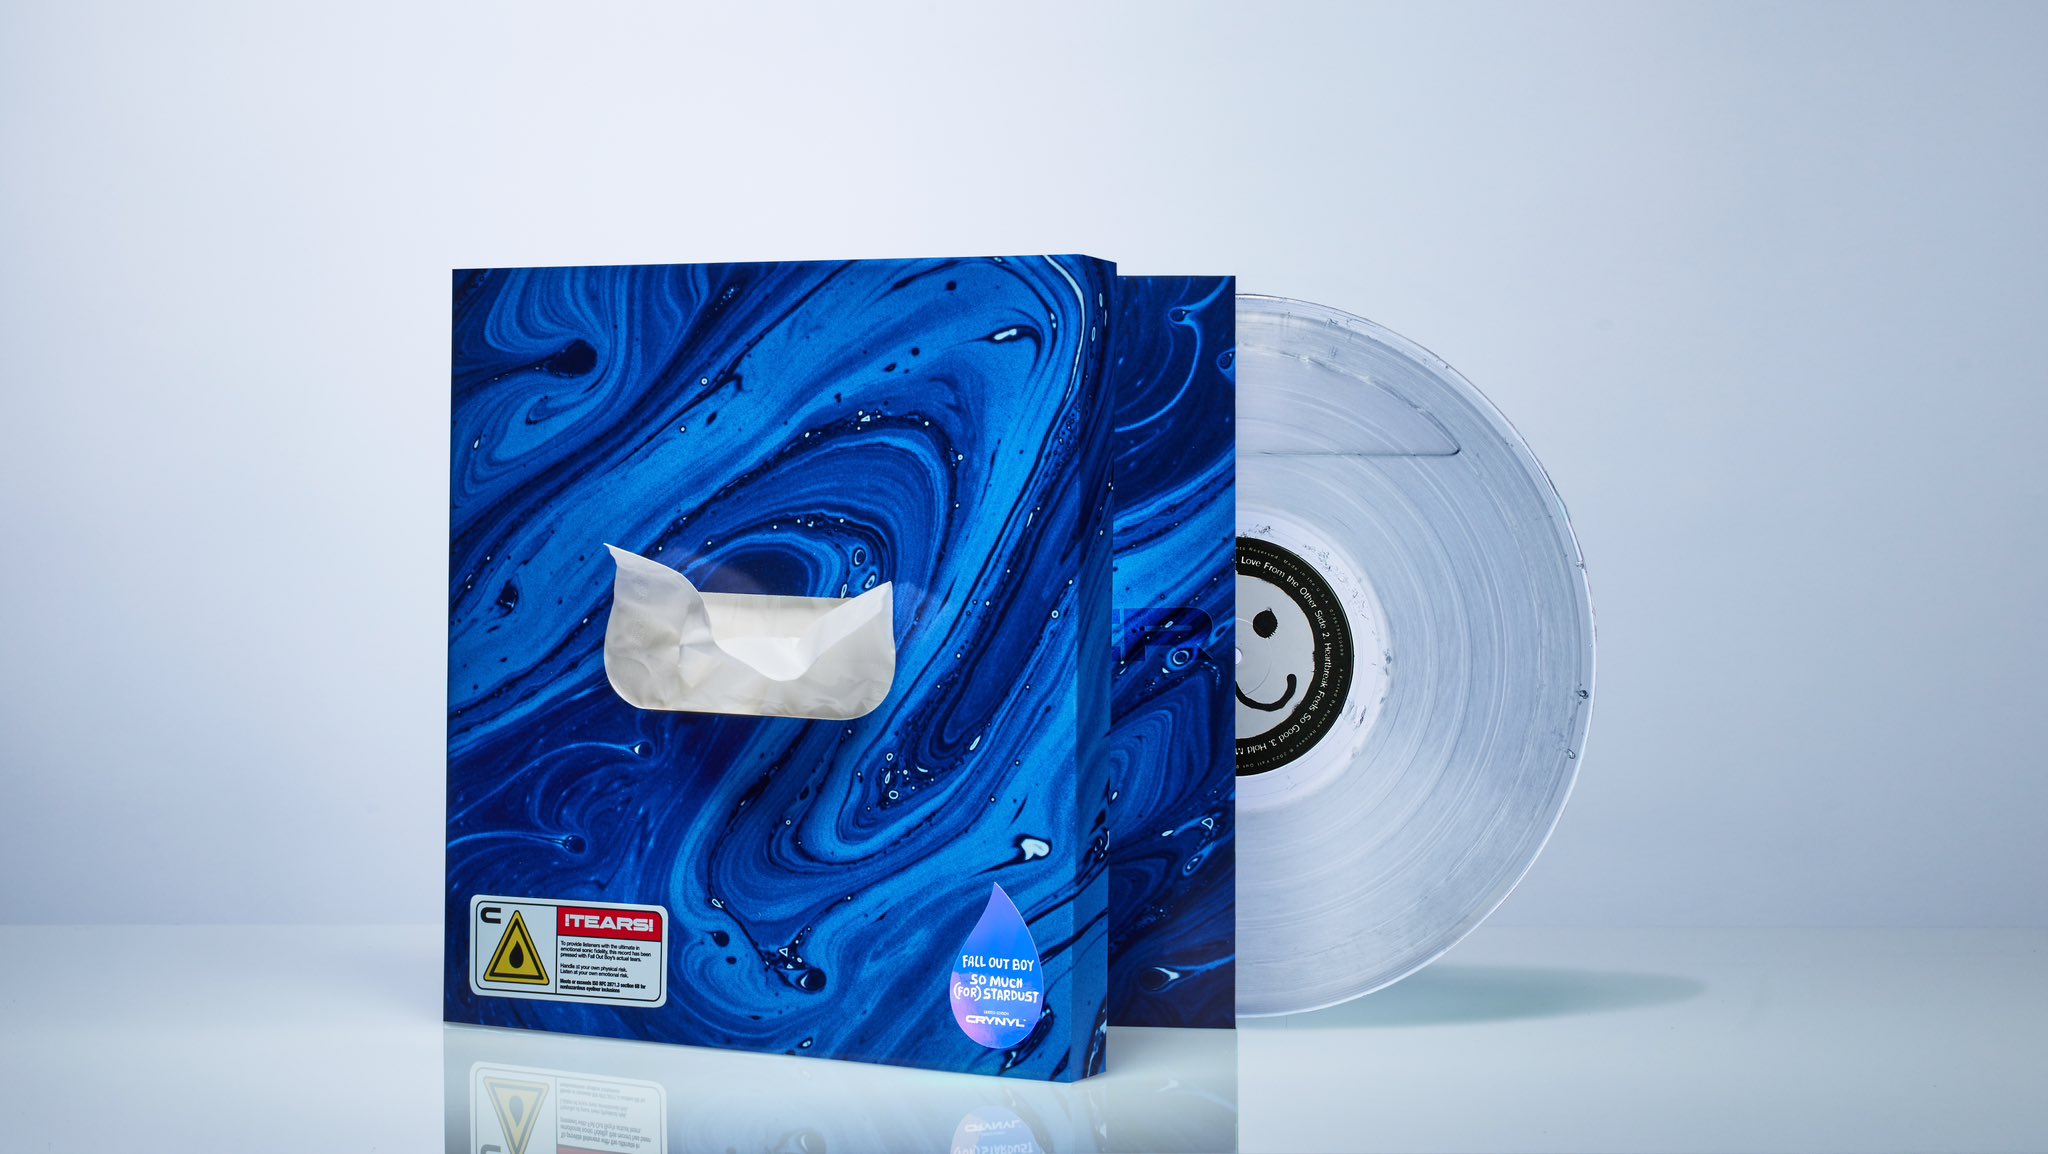 Finally, An Emo Record With a Built-In Tissue Box